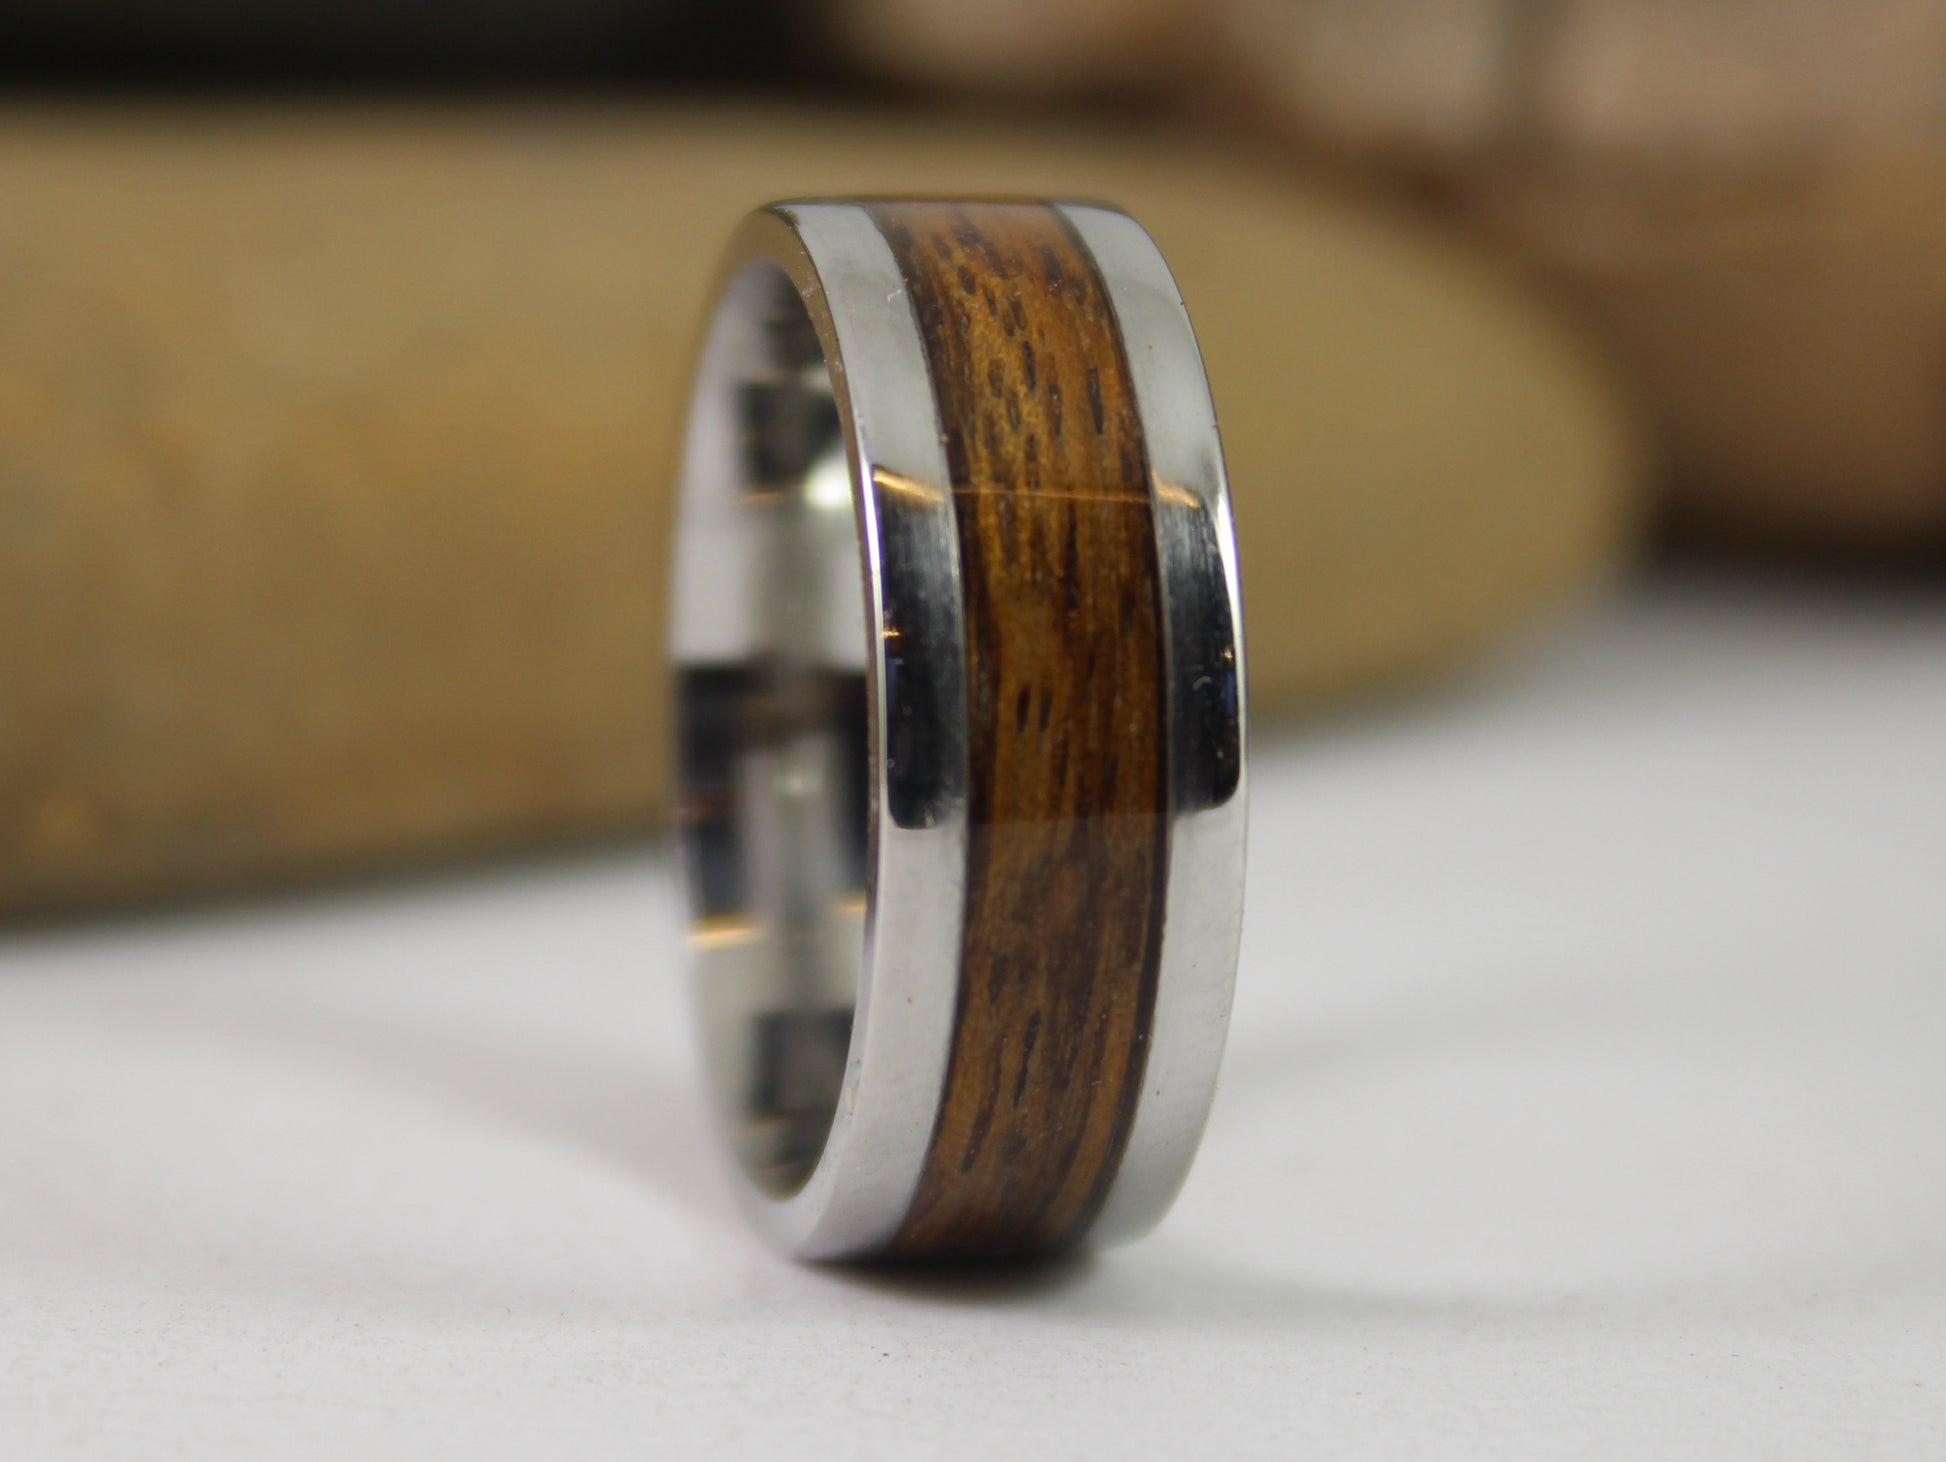 The World War I | Men's Rifle Stock Wood Wedding Band with WWI Uniform & Metal Inlay | Rustic and Main